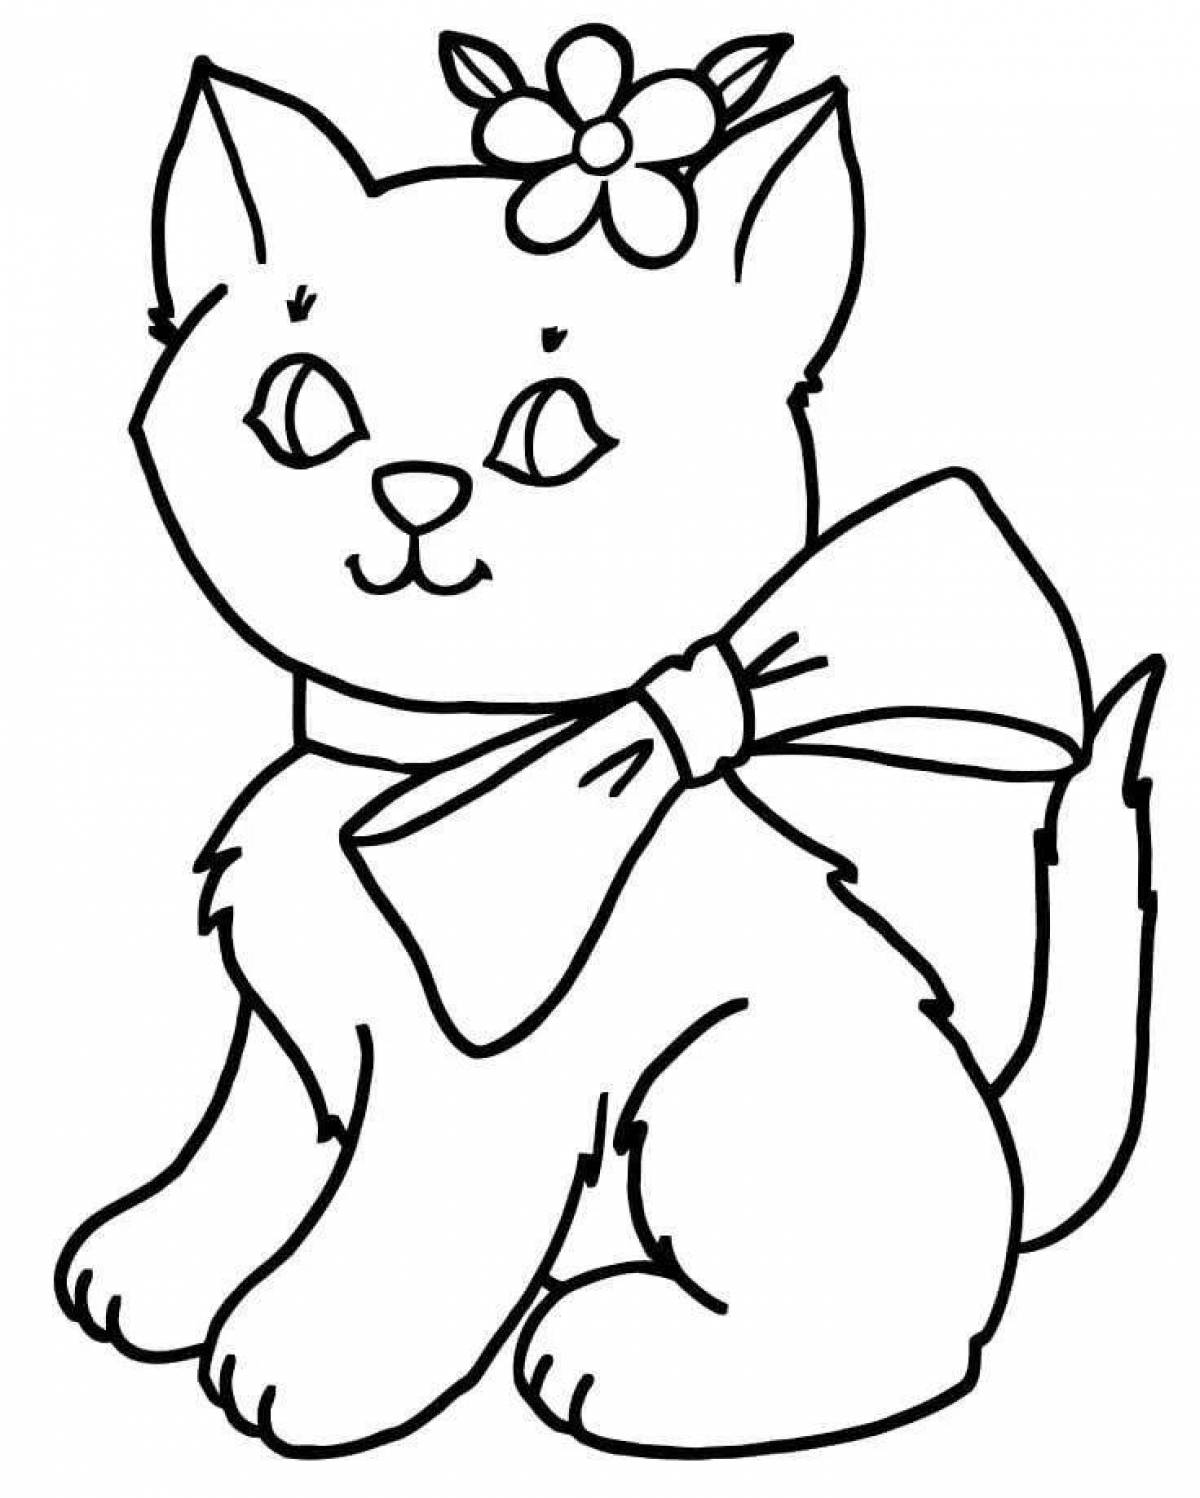 Kitty with a bow #8